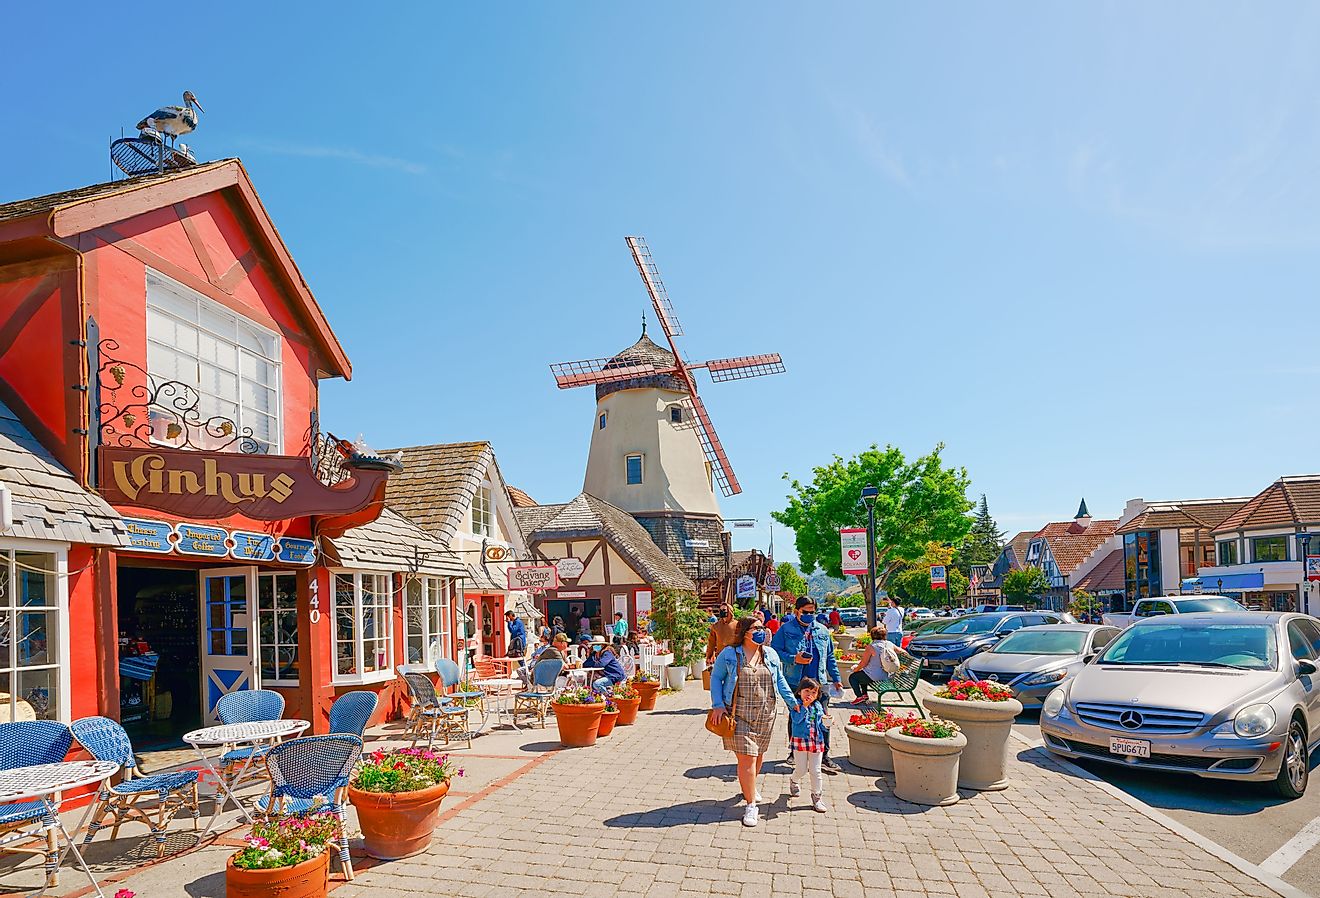 Main street, street view, and tourists in Solvang. Image credit HannaTor via Shutterstock.